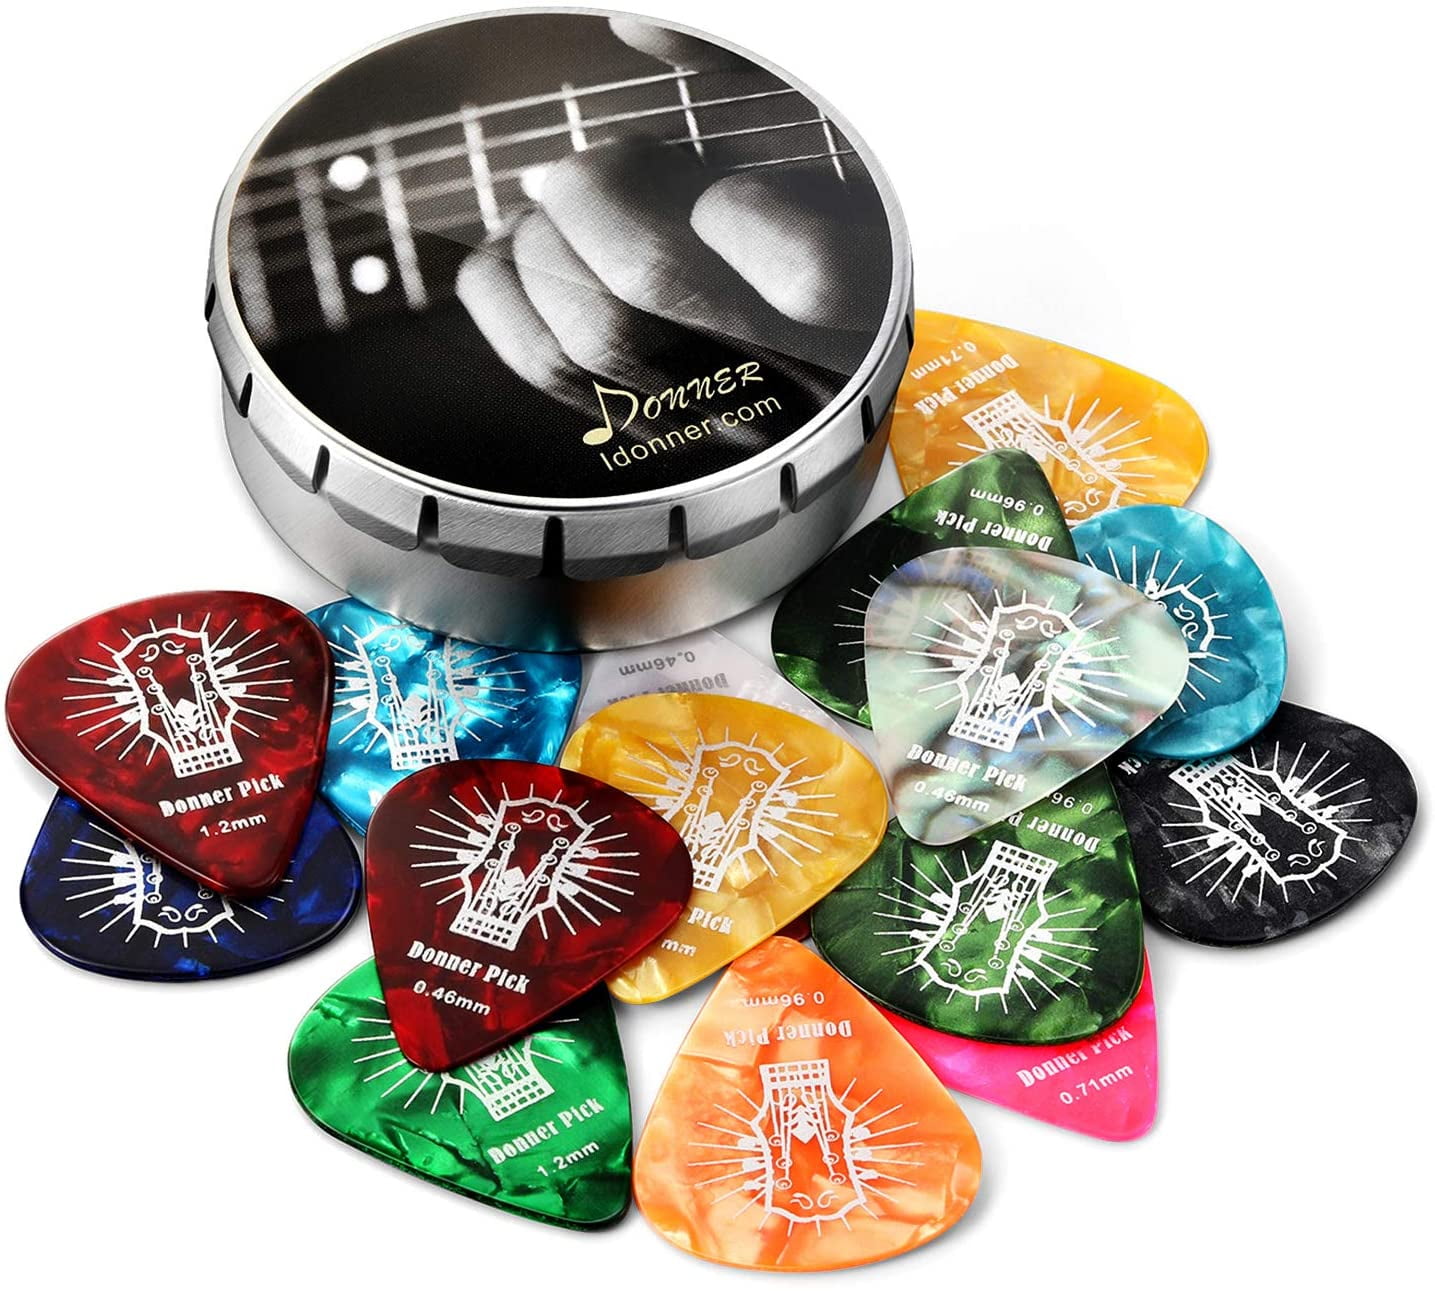 Guitar Pick Holder Case Bag with 24pcs Acoustic Electric Guitar Colorful Picks Little Picks Holder Set Variety Pack Mixed Thickness Picks 0.46mm/ 0.71mm/ 0.96mm 